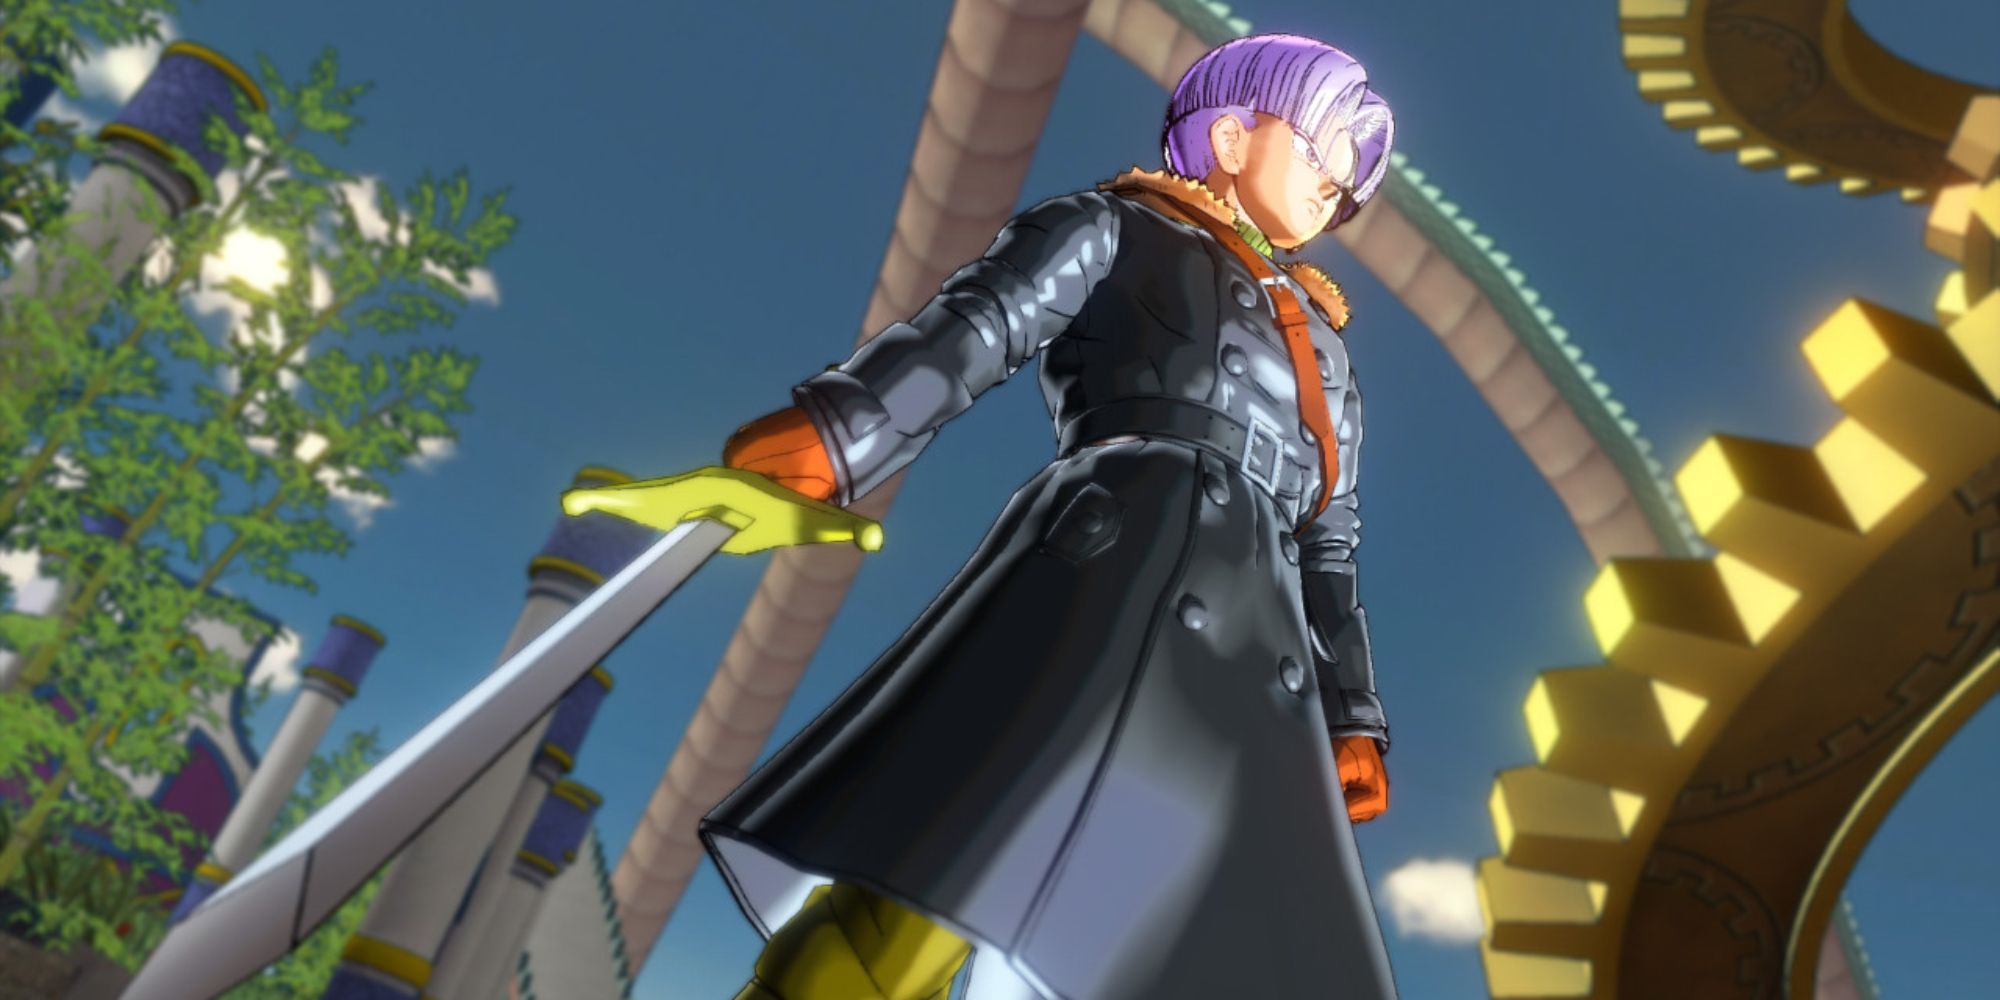 Dragon Ball Xenoverse Screenshot Of Future Trunks With Swords